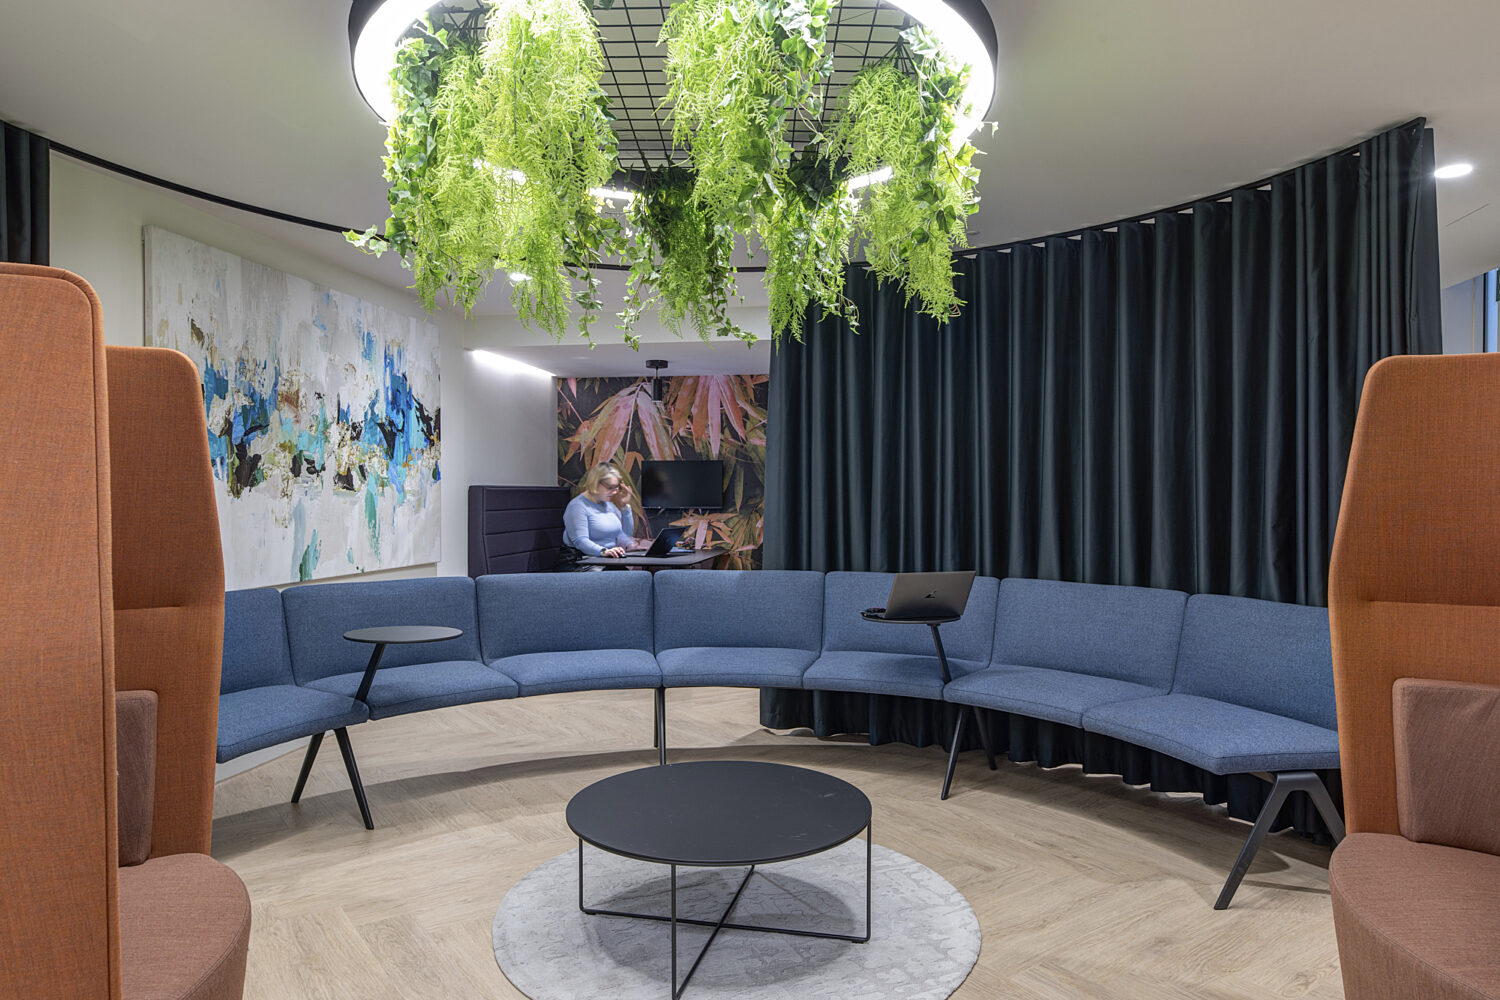 Town hall style seating with flexible soft curtain detailing in London office